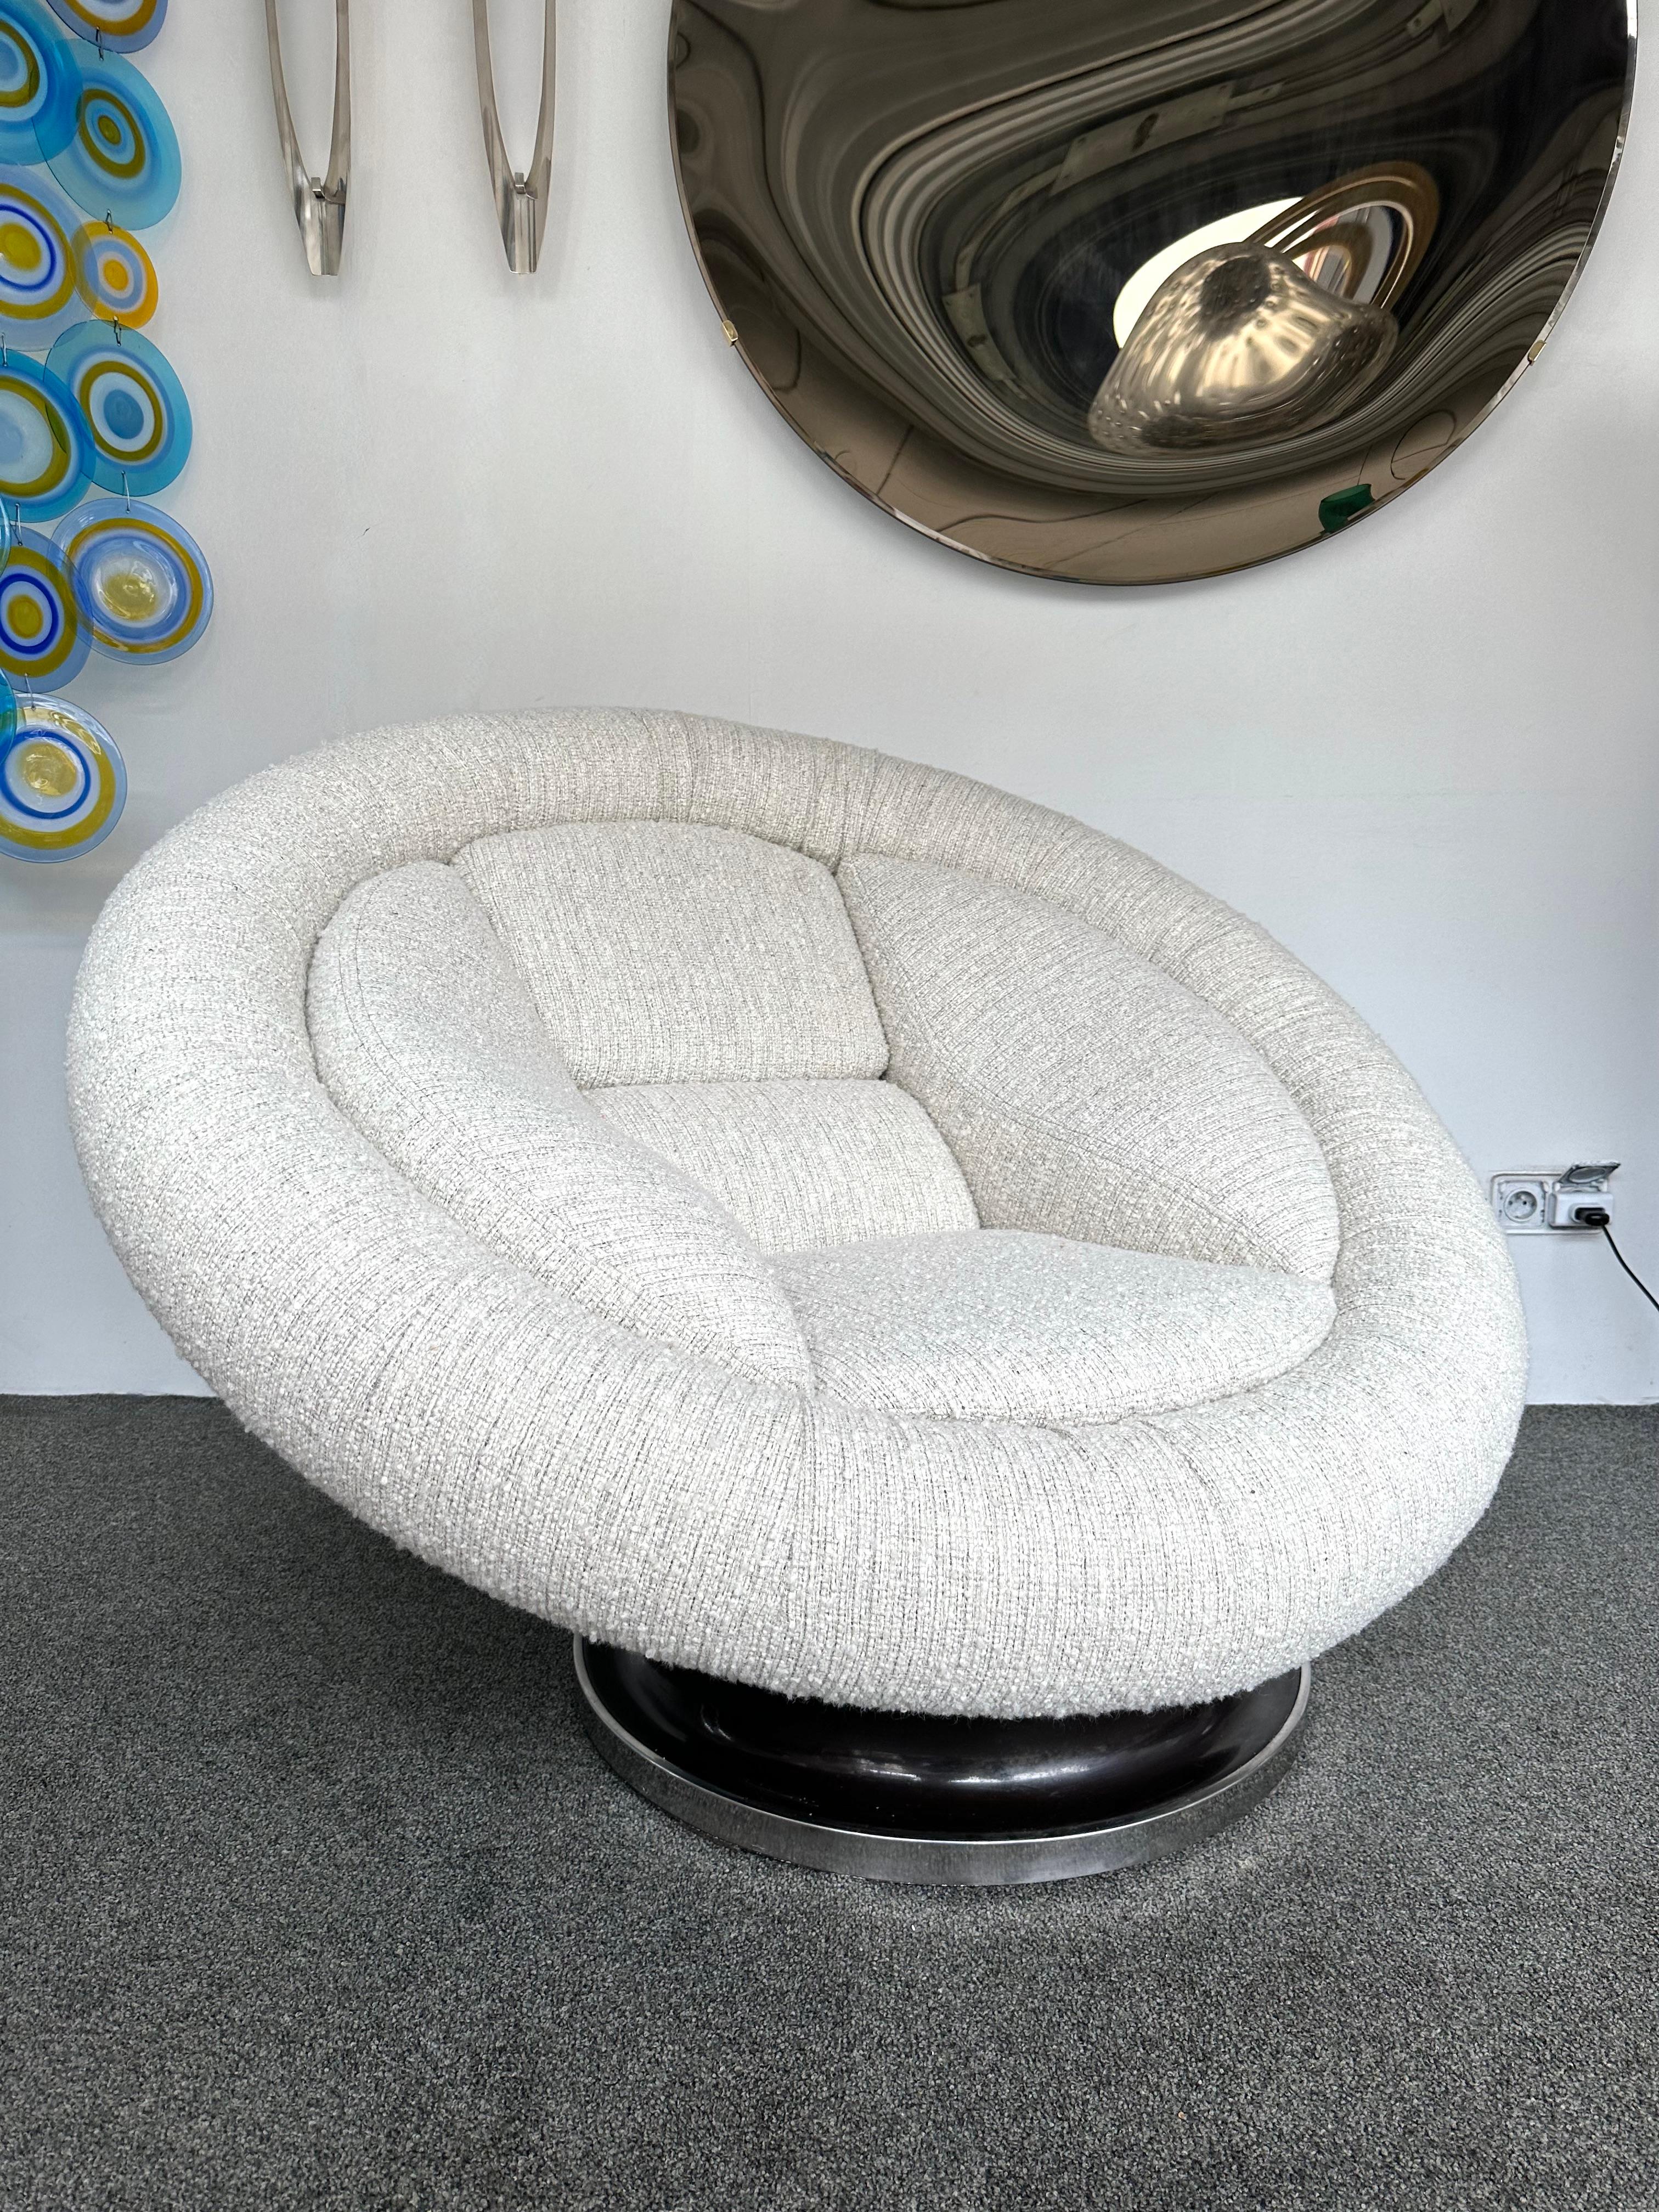 Pair of Large Space Age Saturn Armchairs by Saporiti. Italy, 1970s For Sale 8